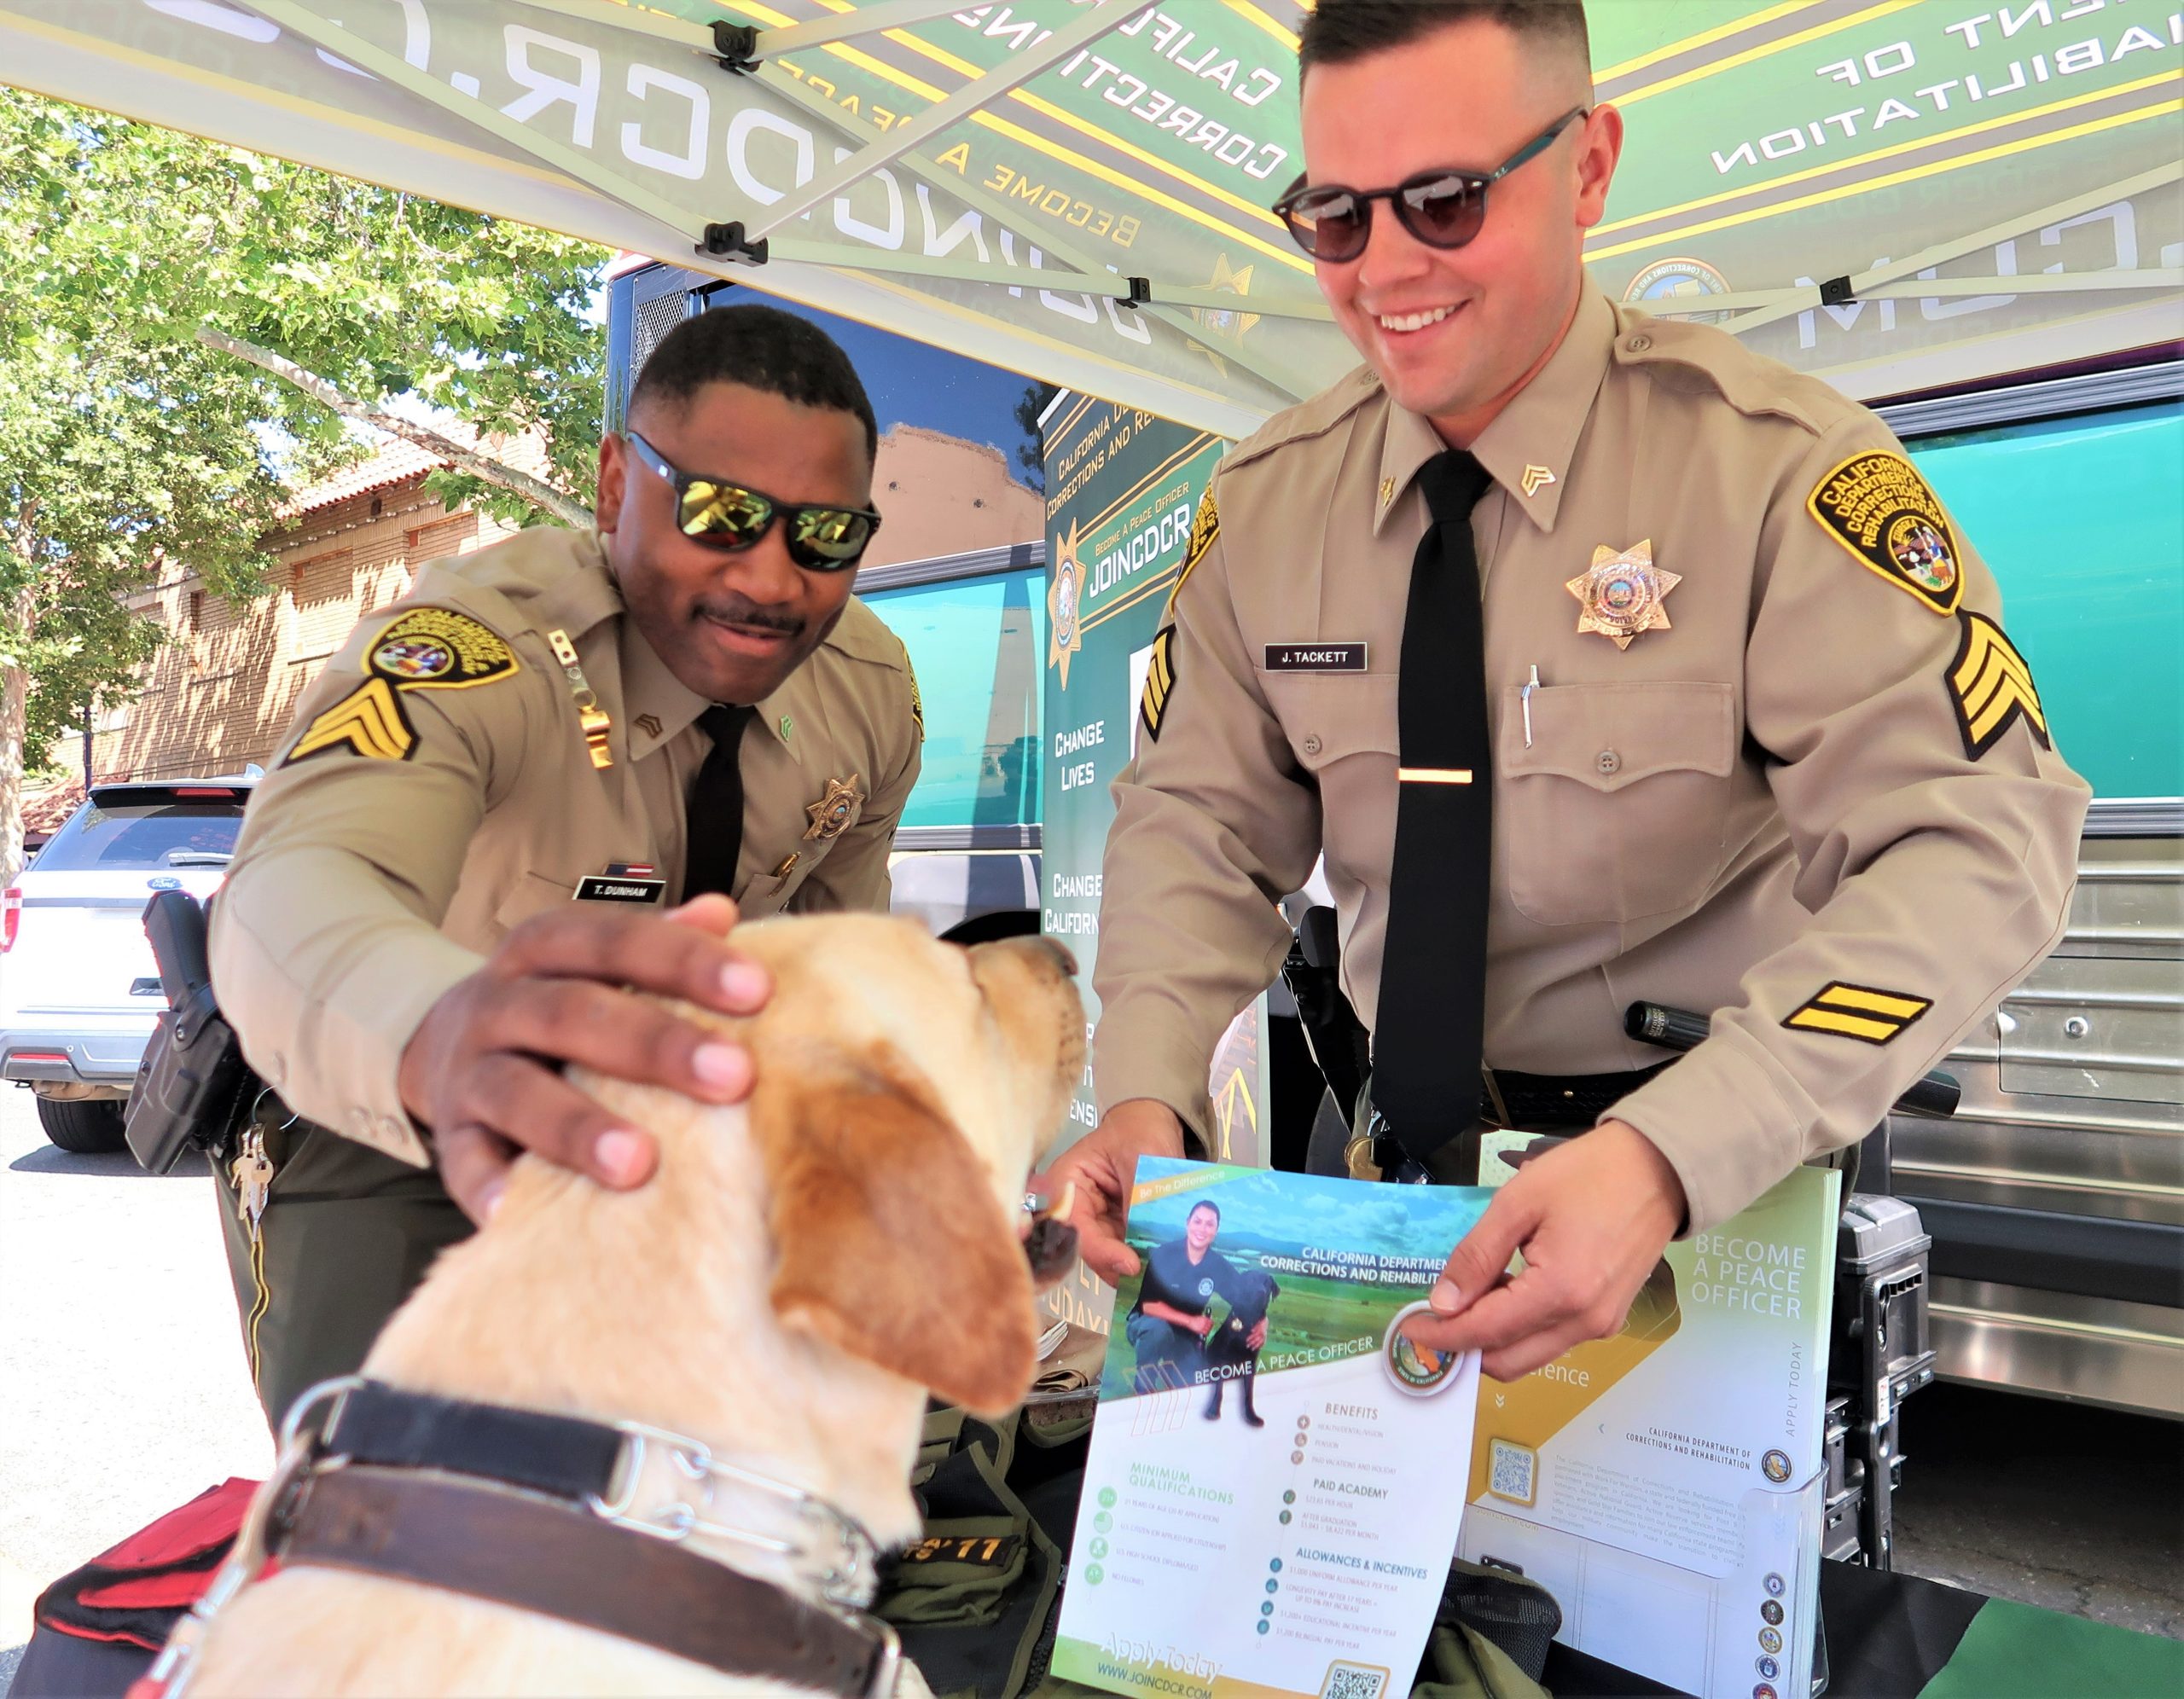 Two CDCR correctional sergeants and a dog at a market and safety event in Galt.